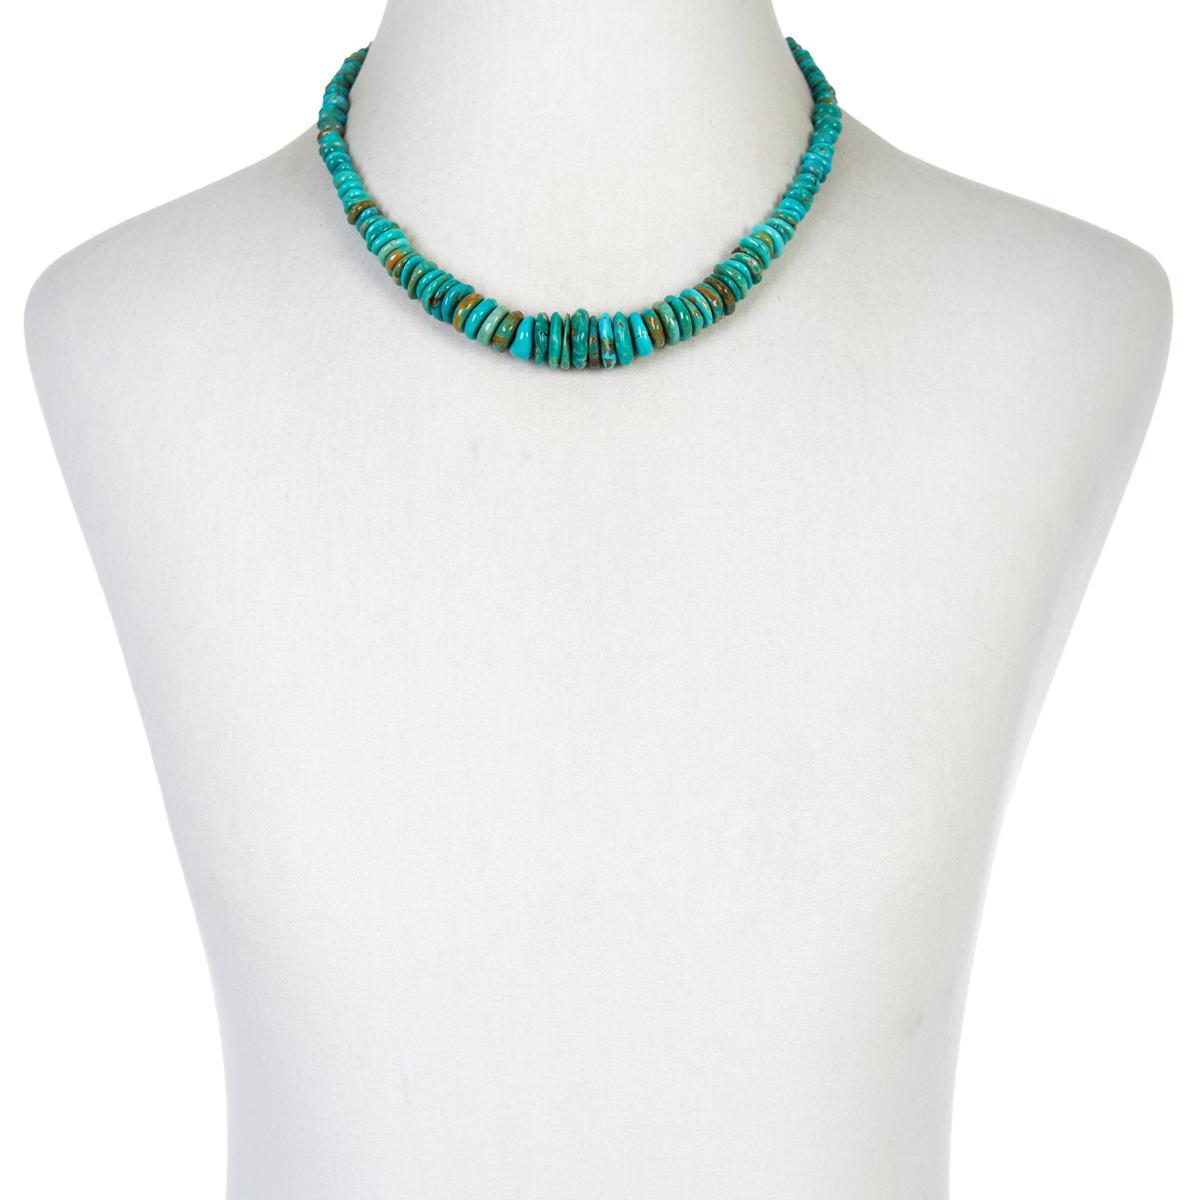 Jay King 18" Turquoise Beaded Necklace